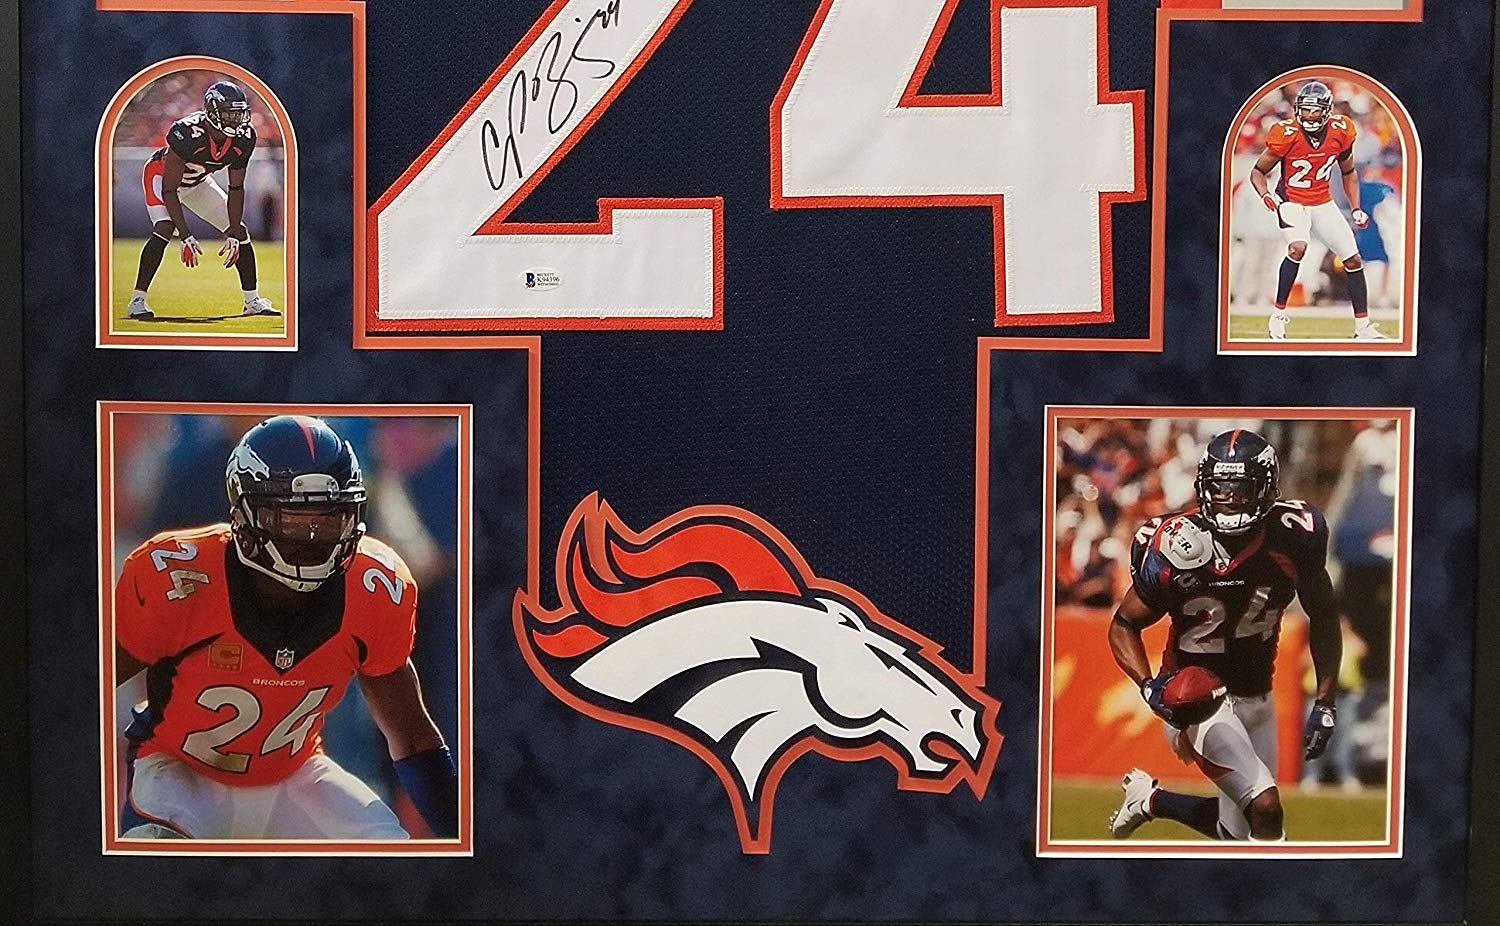 champ bailey signed jersey